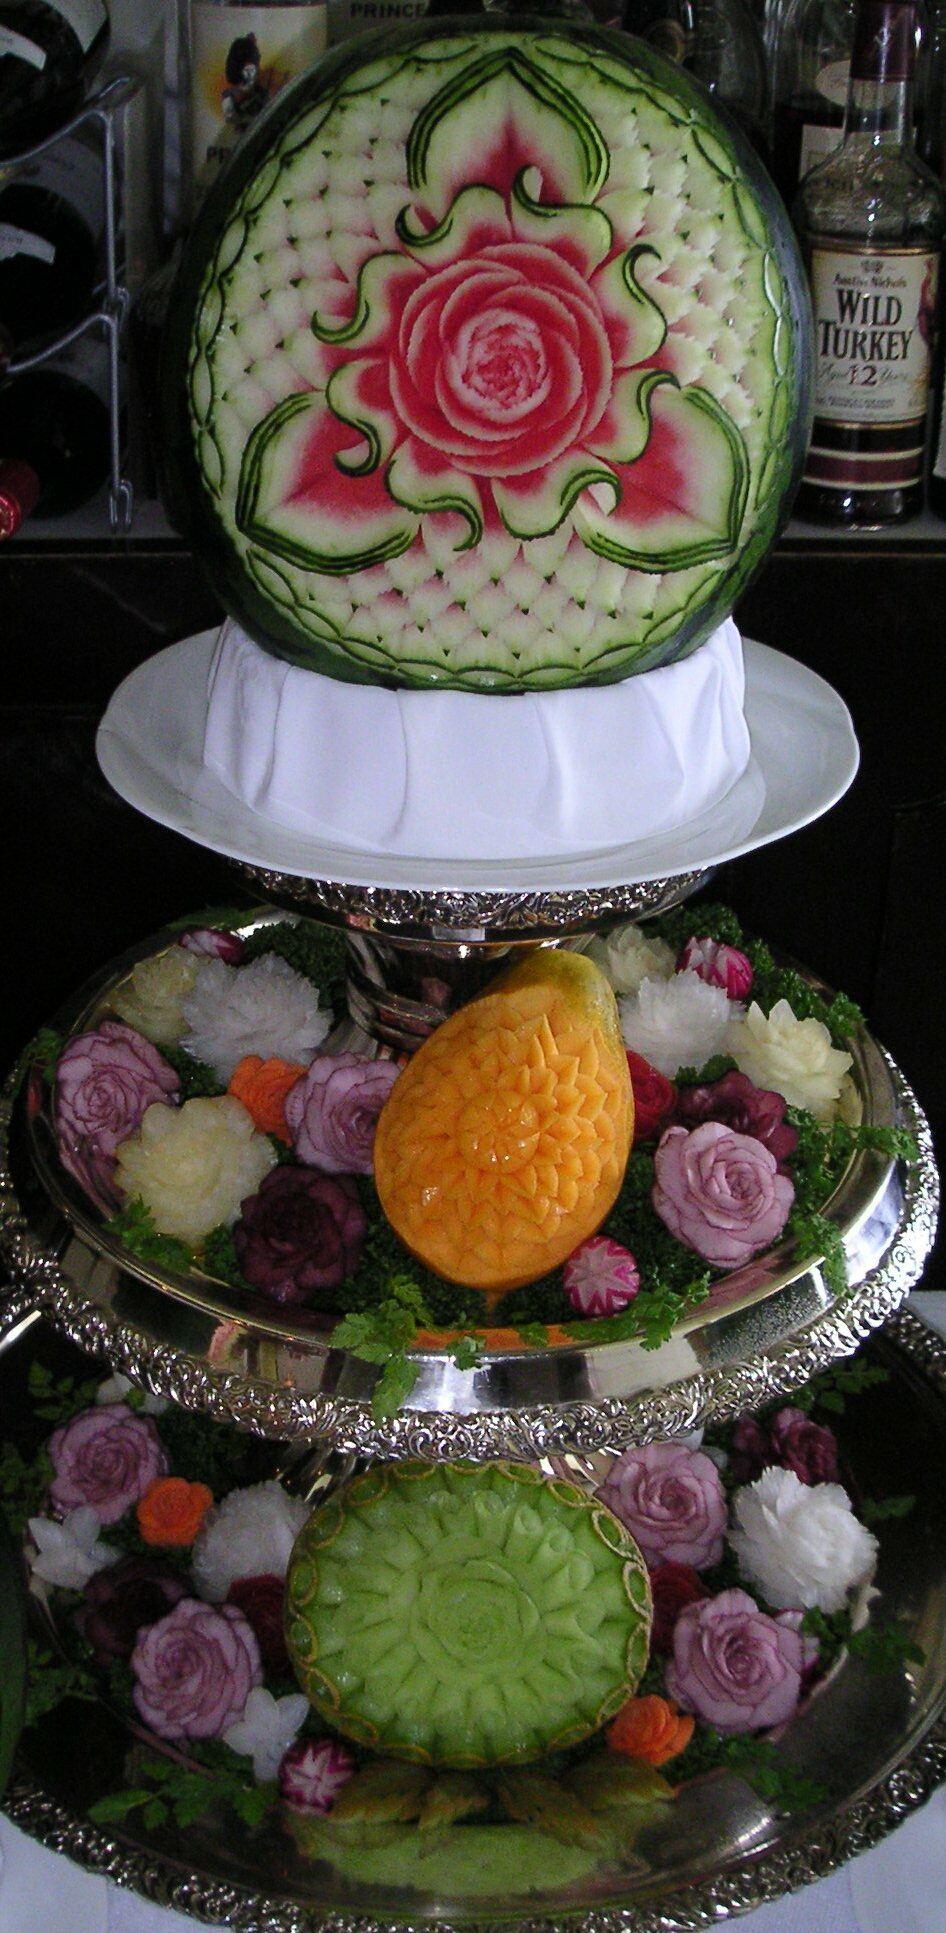 Watermelon, Fruits and Vegetables Artwork by Takashi Itoh.